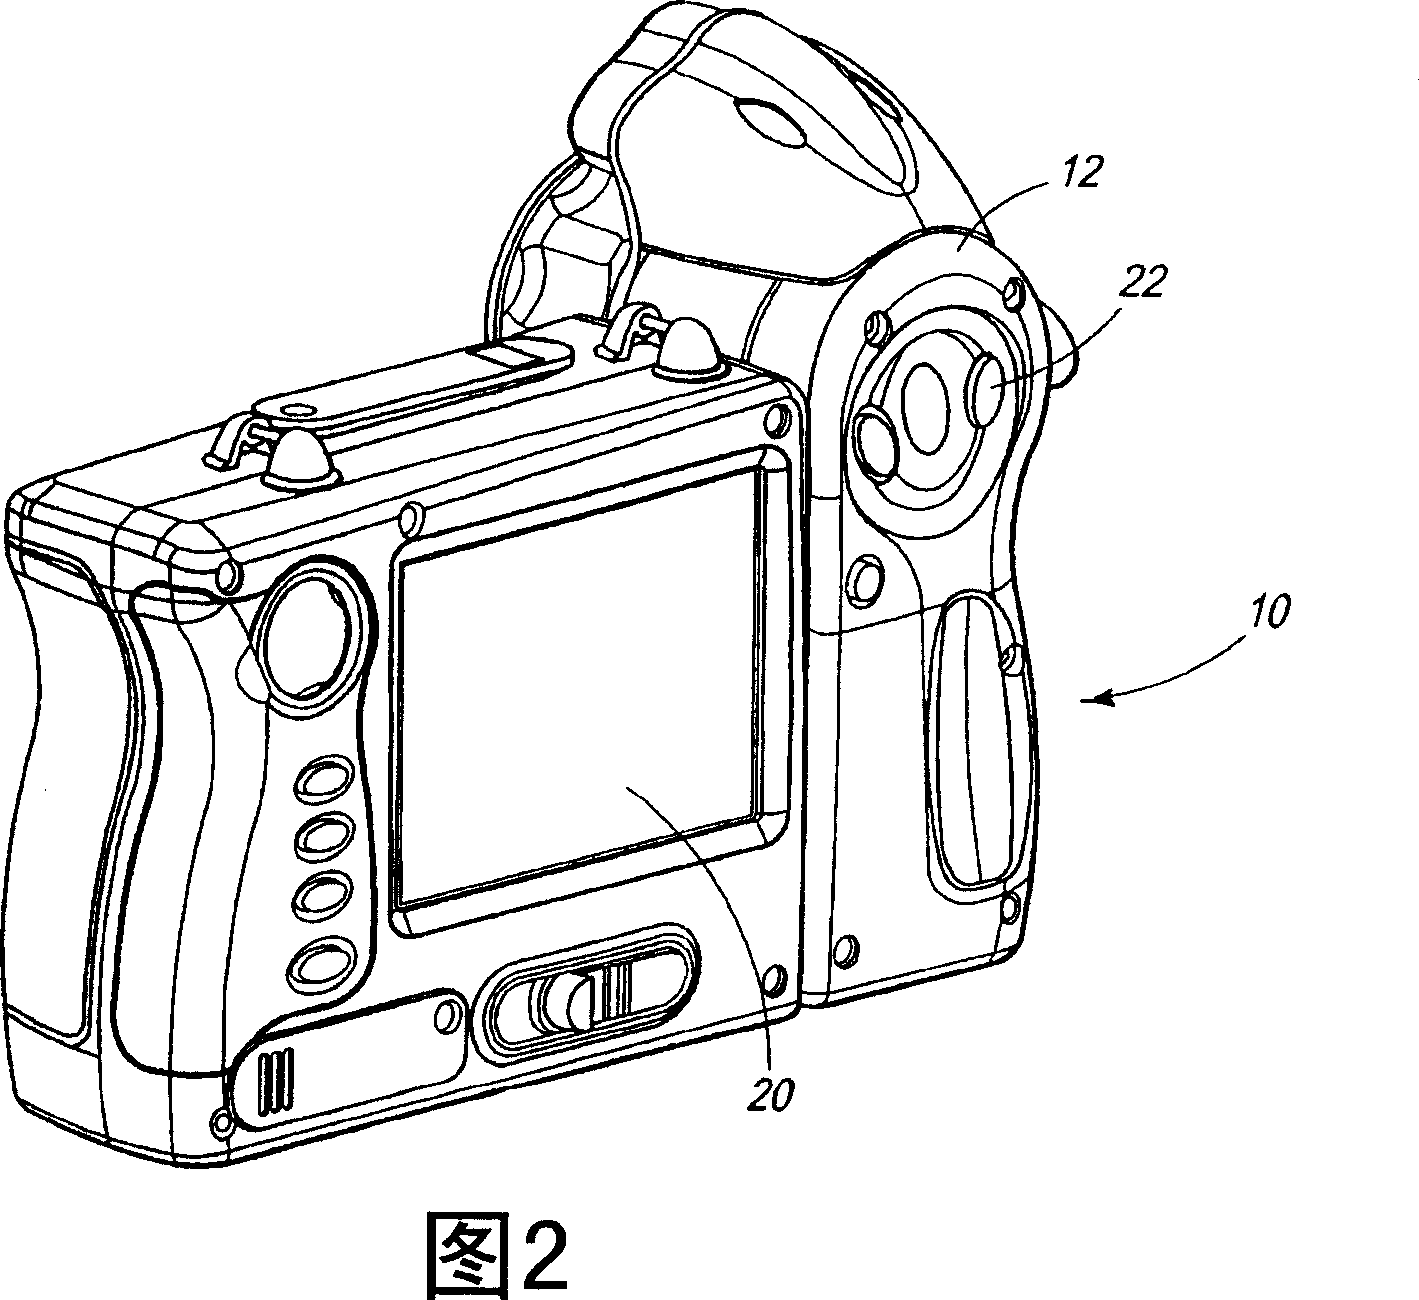 Camera with visible light and infrared image blending